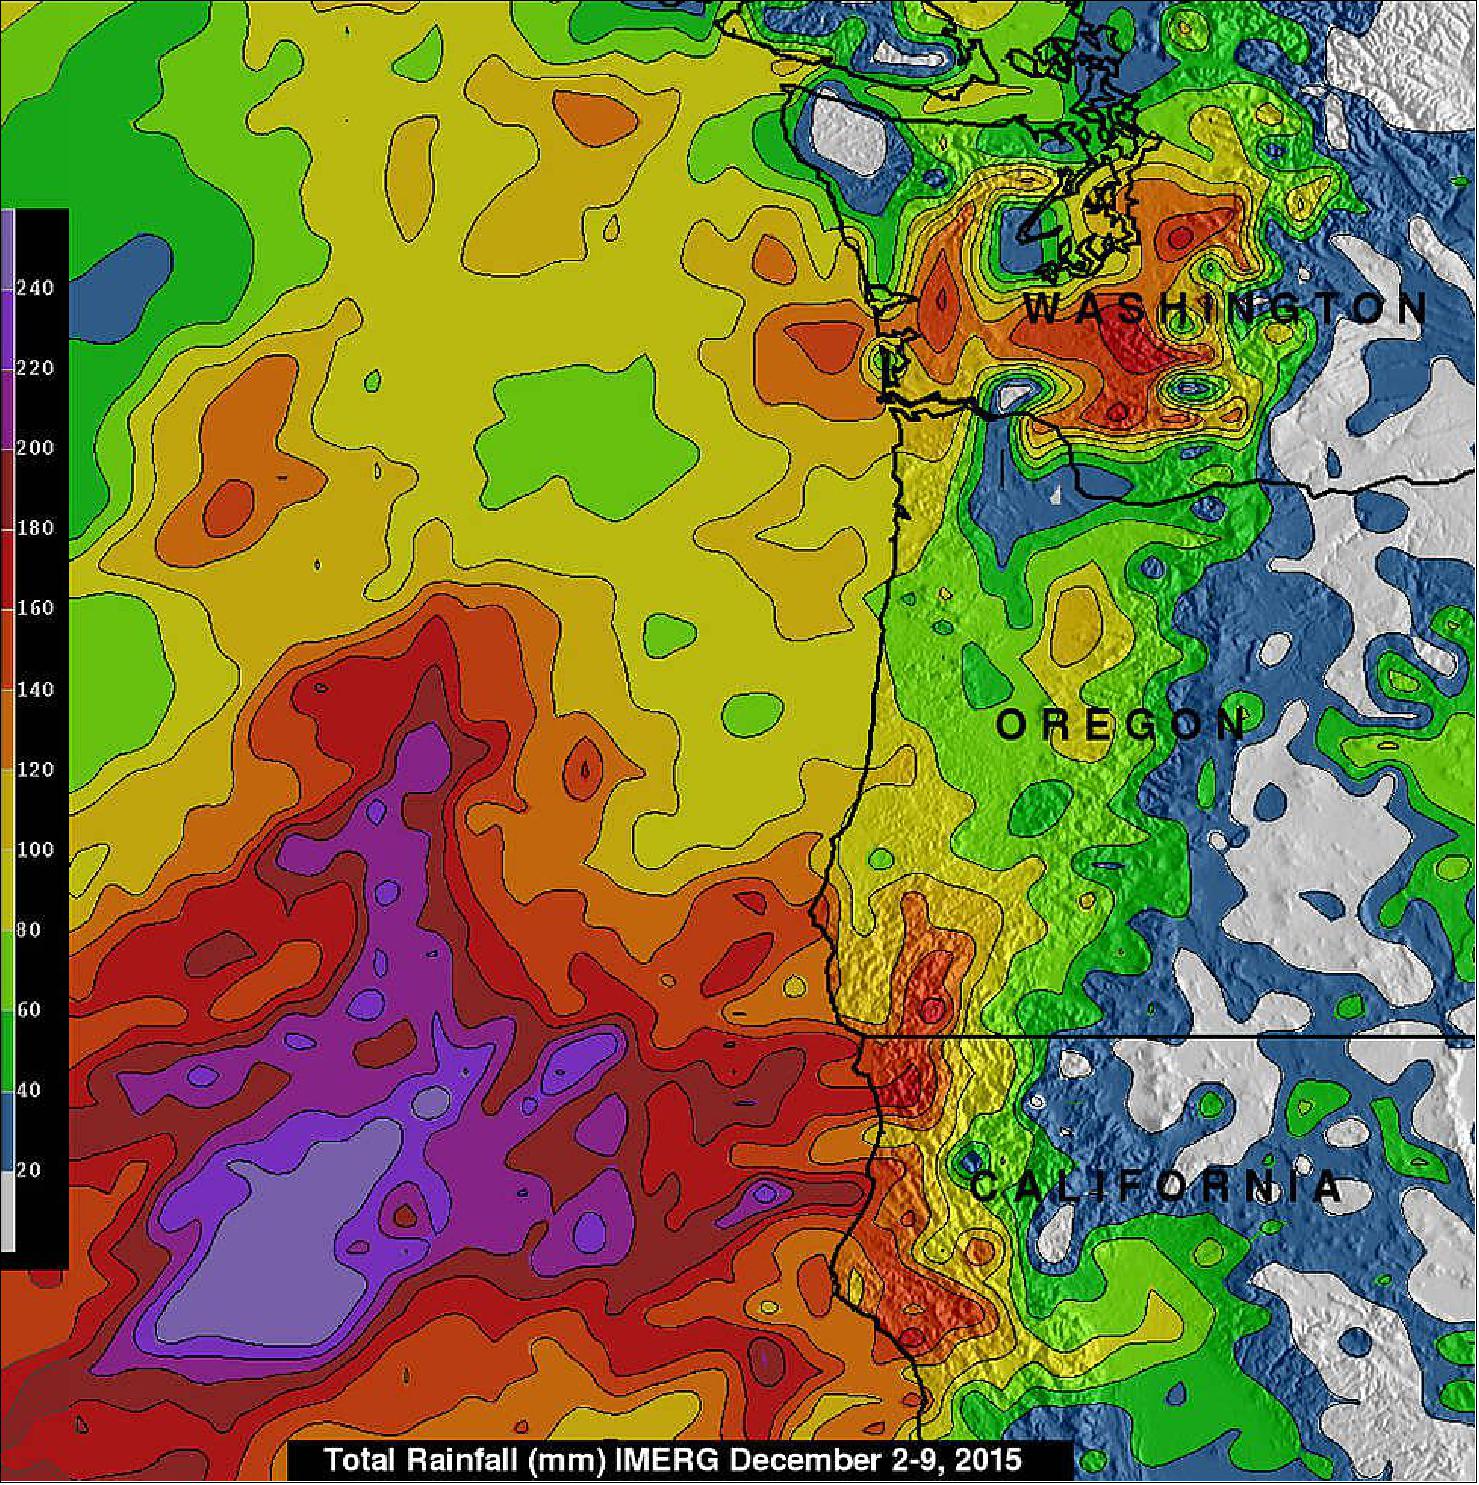 Figure 54: NASA's IMERG measured rainfall from Dec. 2 to 9 and found that many areas from northern California through the state of Washington had rainfall totals greater than 160 mm. Over open waters of the Pacific Ocean some rainfall totals reached over 310 mm (image credit: NASA/JAXA/SSAI, Hal Pierce)